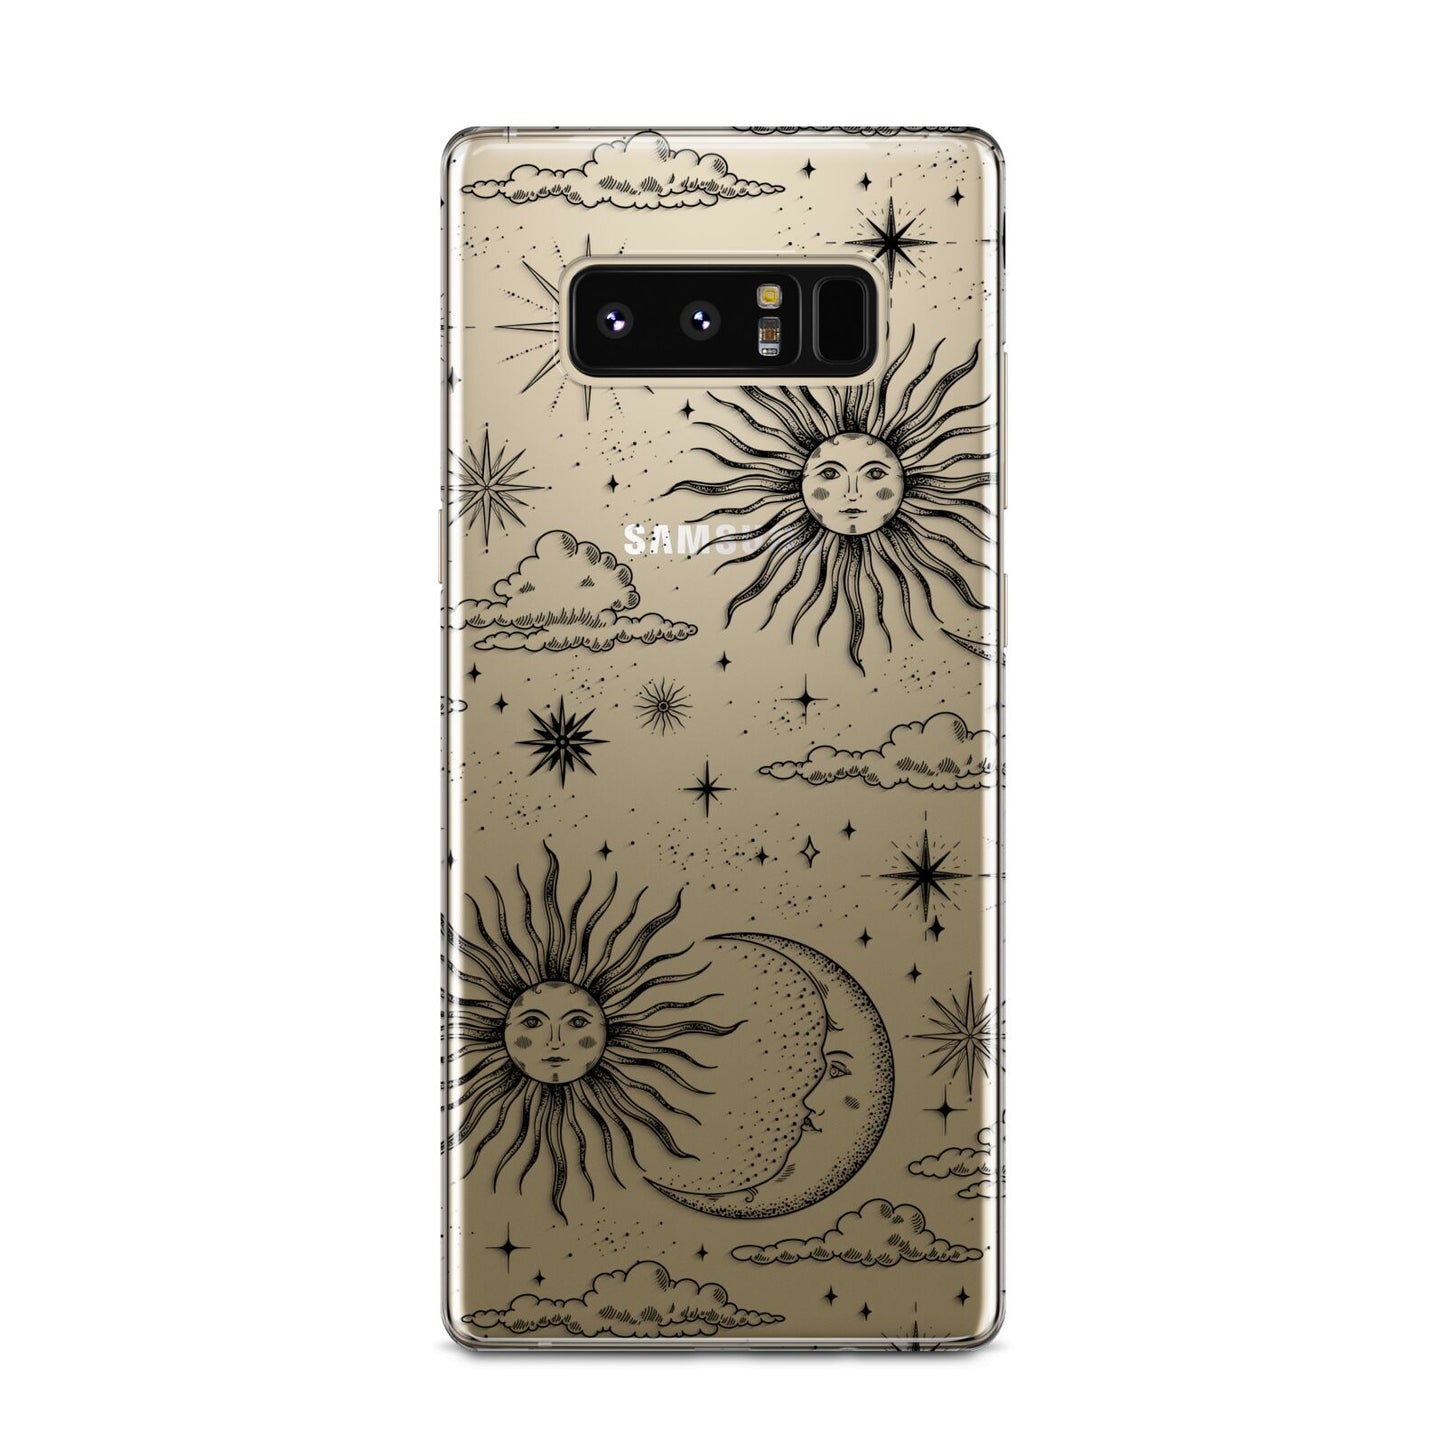 Celestial Suns Clouds Samsung Galaxy Note 8 Case